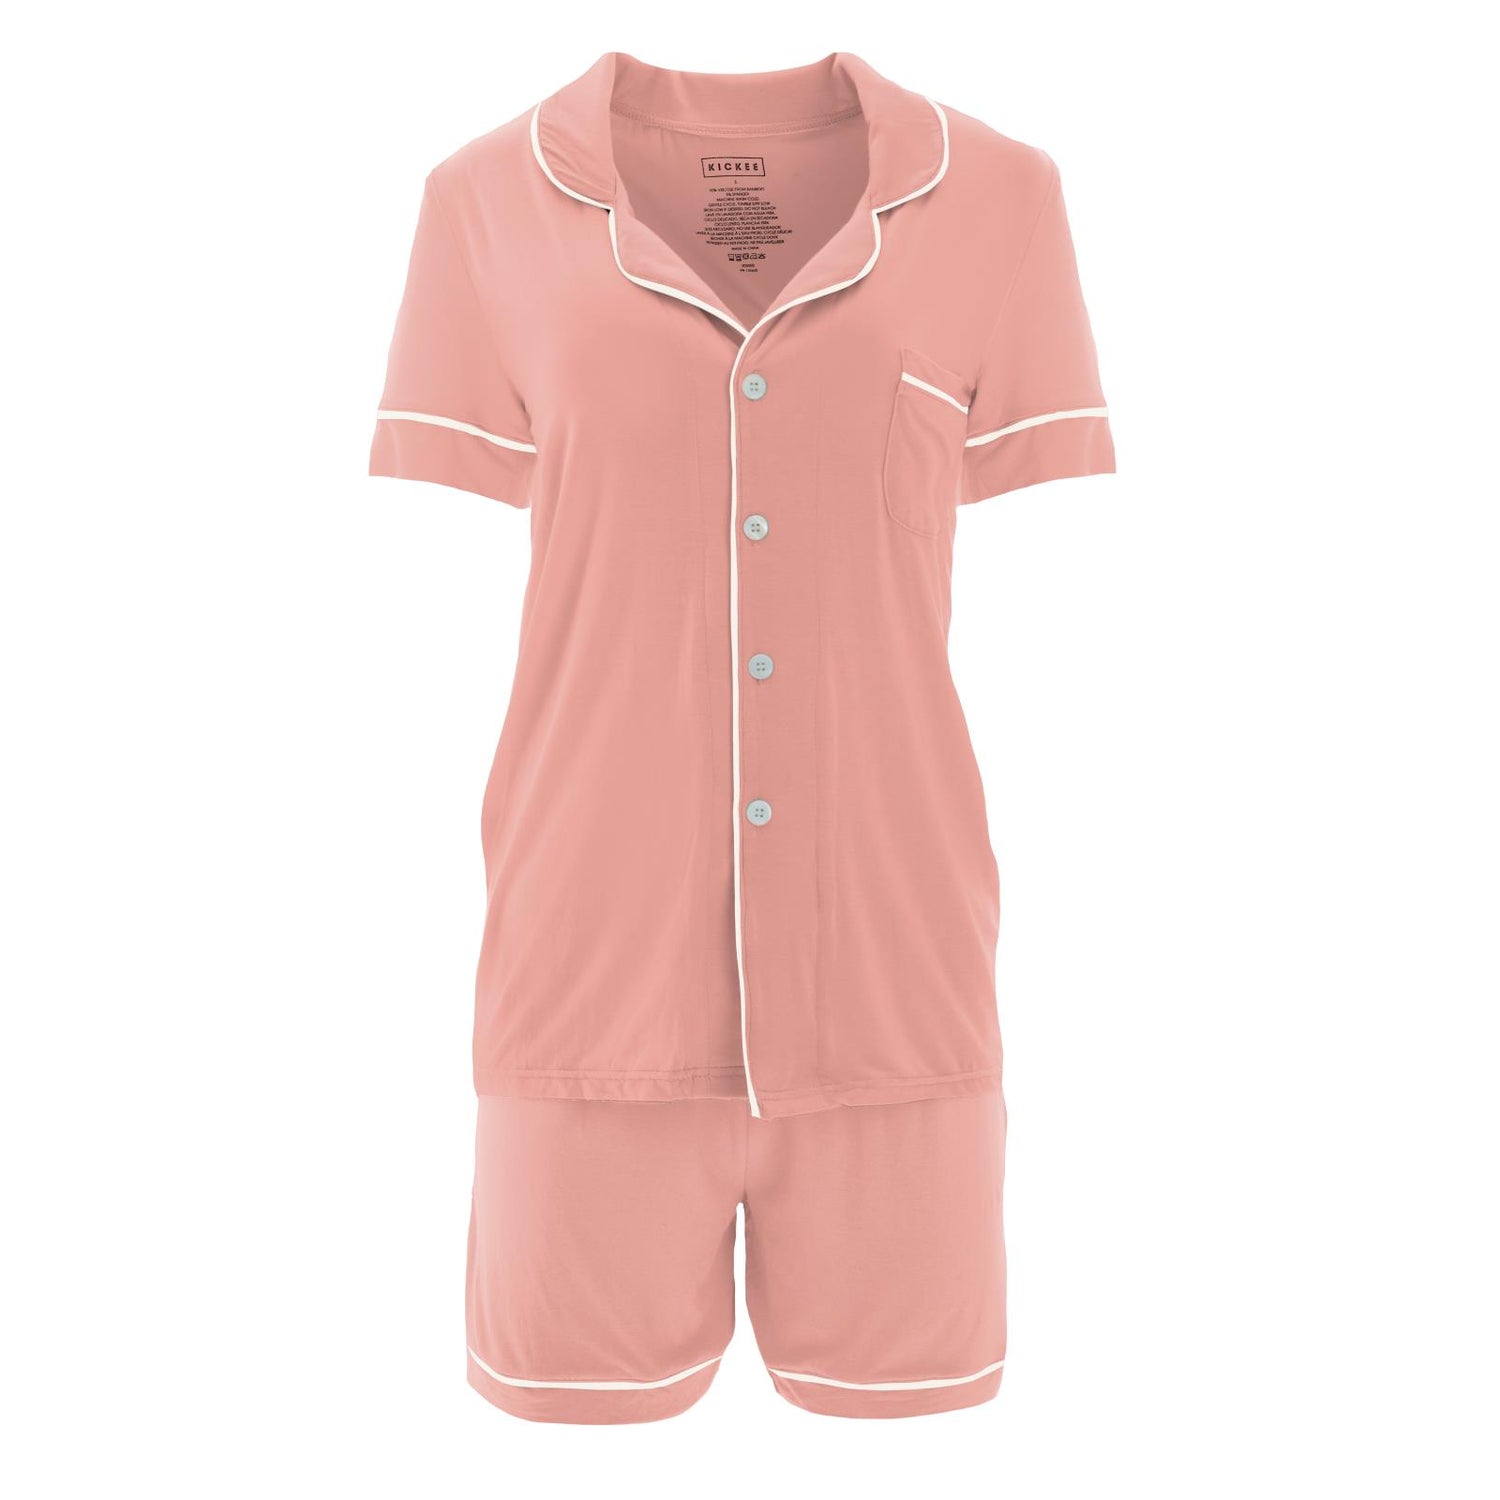 Women's Short Sleeve Collared Pajama Set with Shorts in Blush with Natural